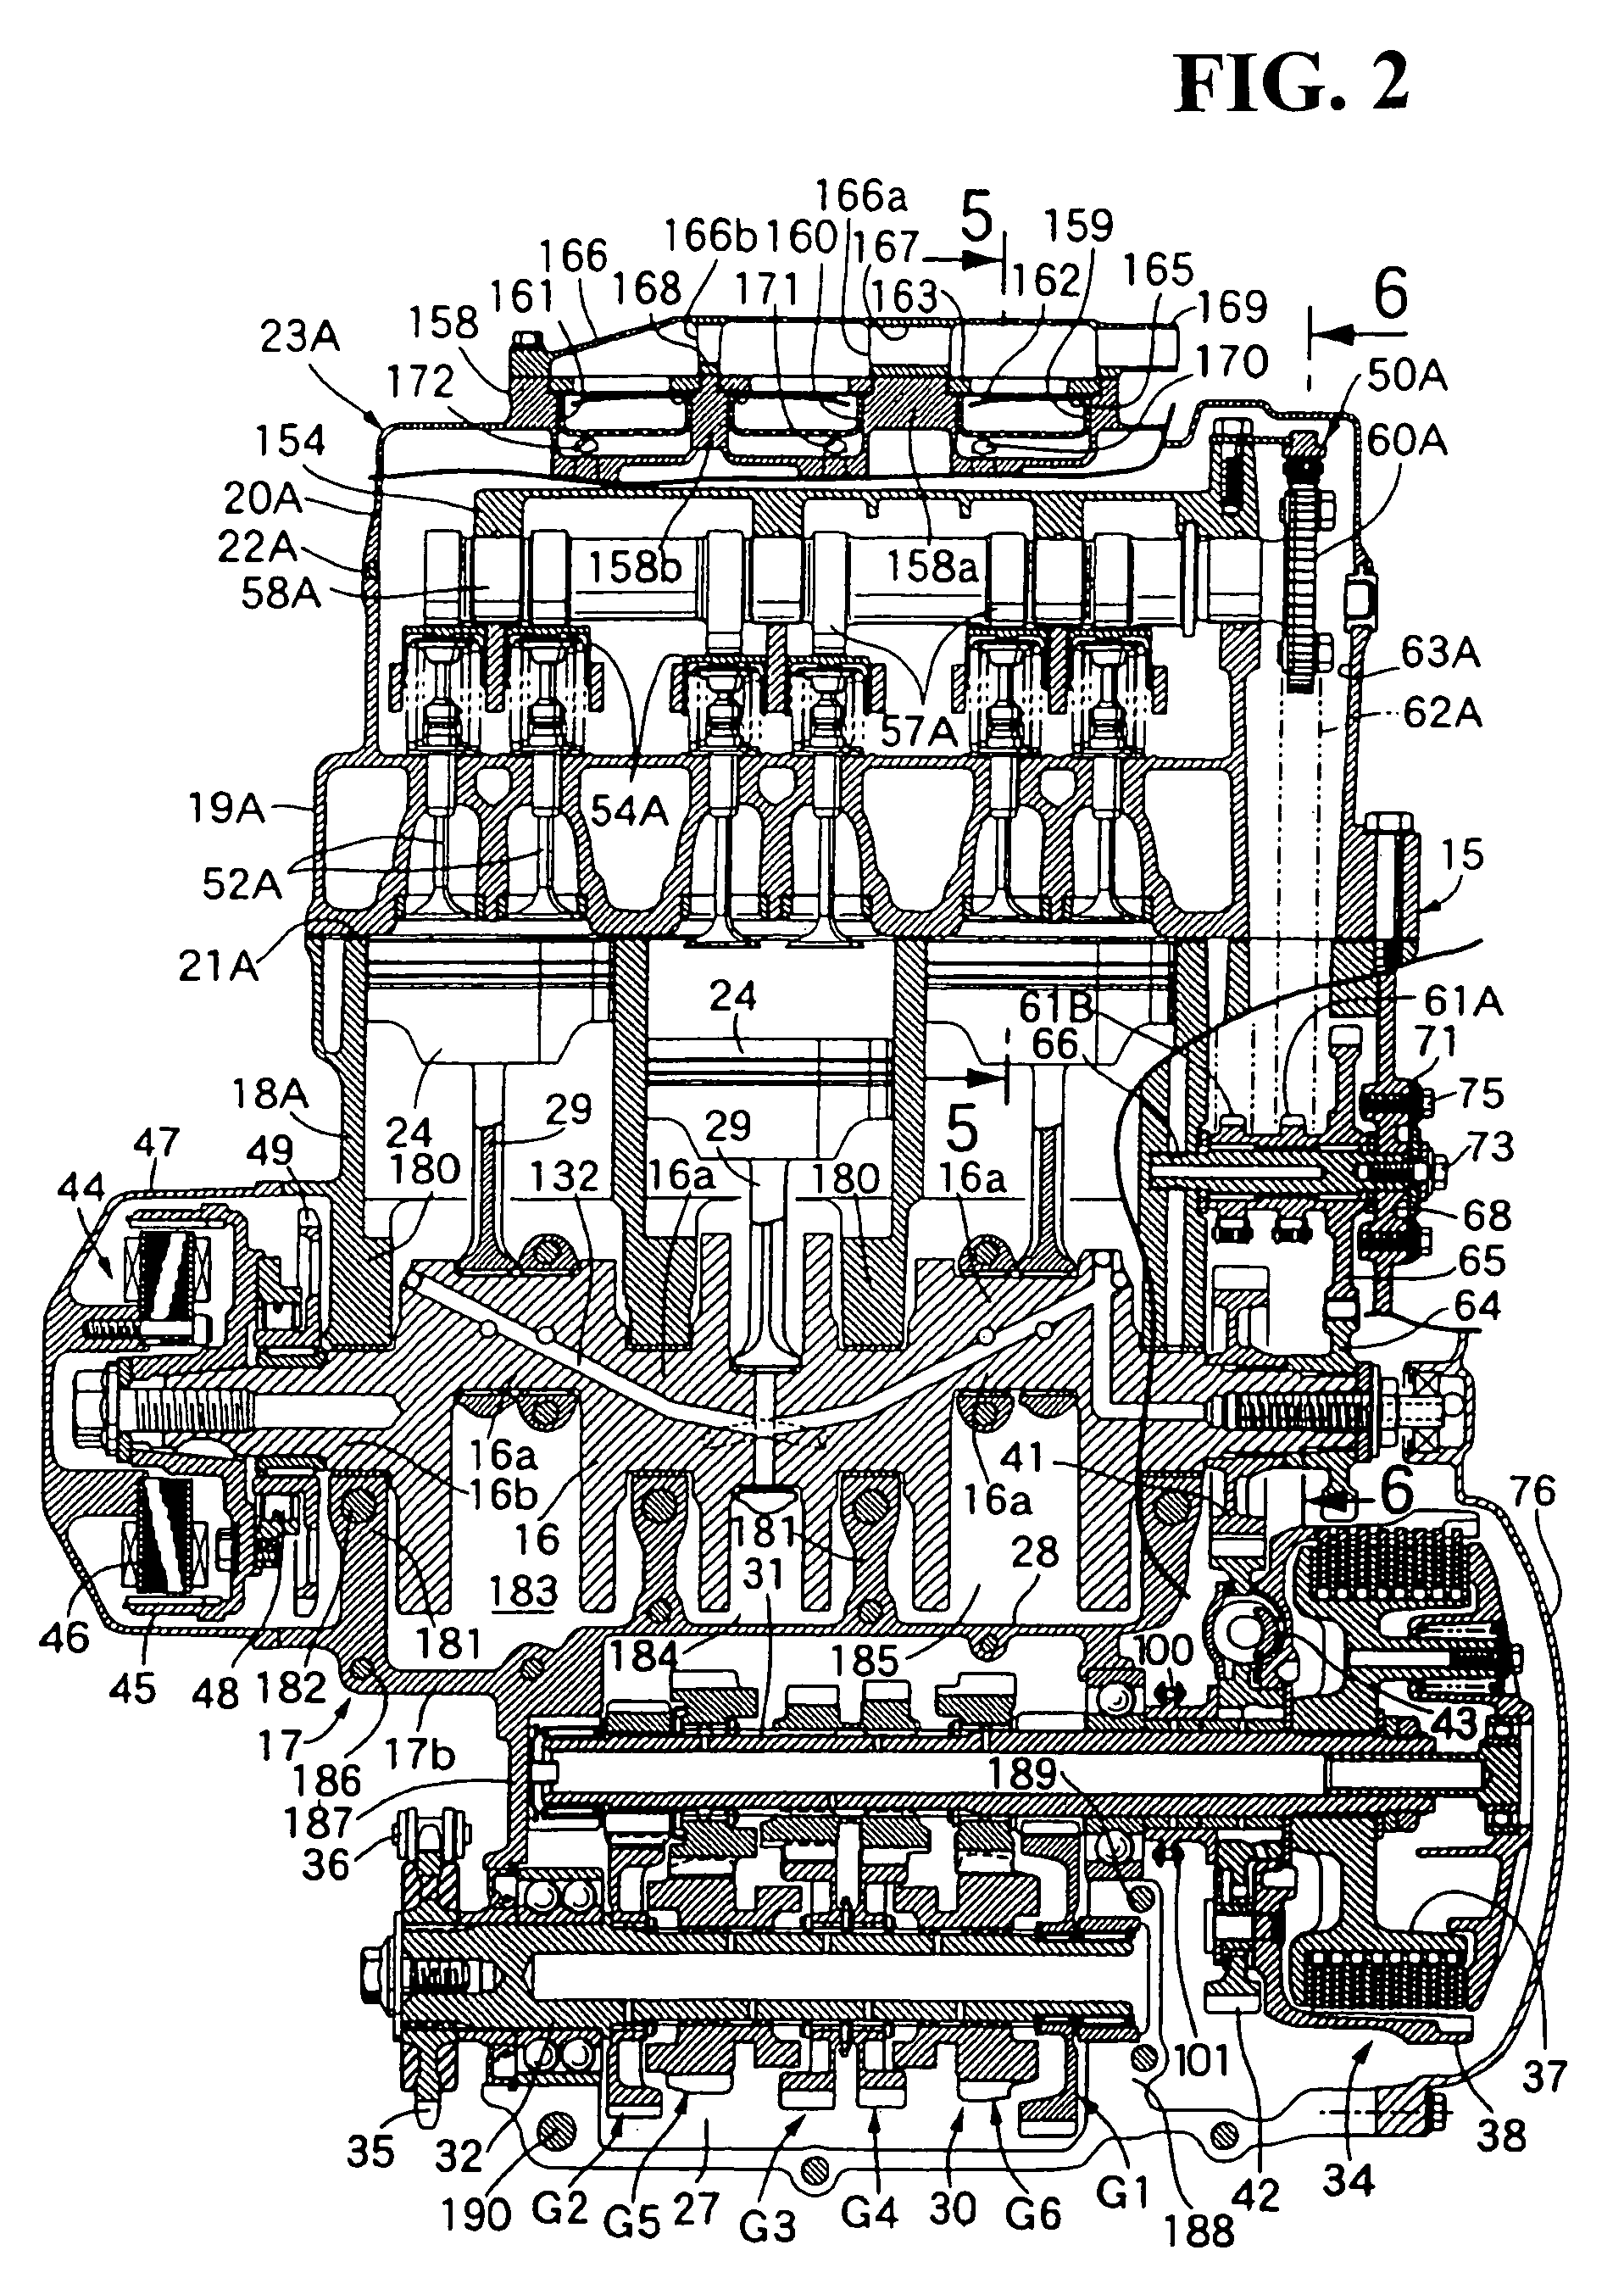 Engine for motorcycle